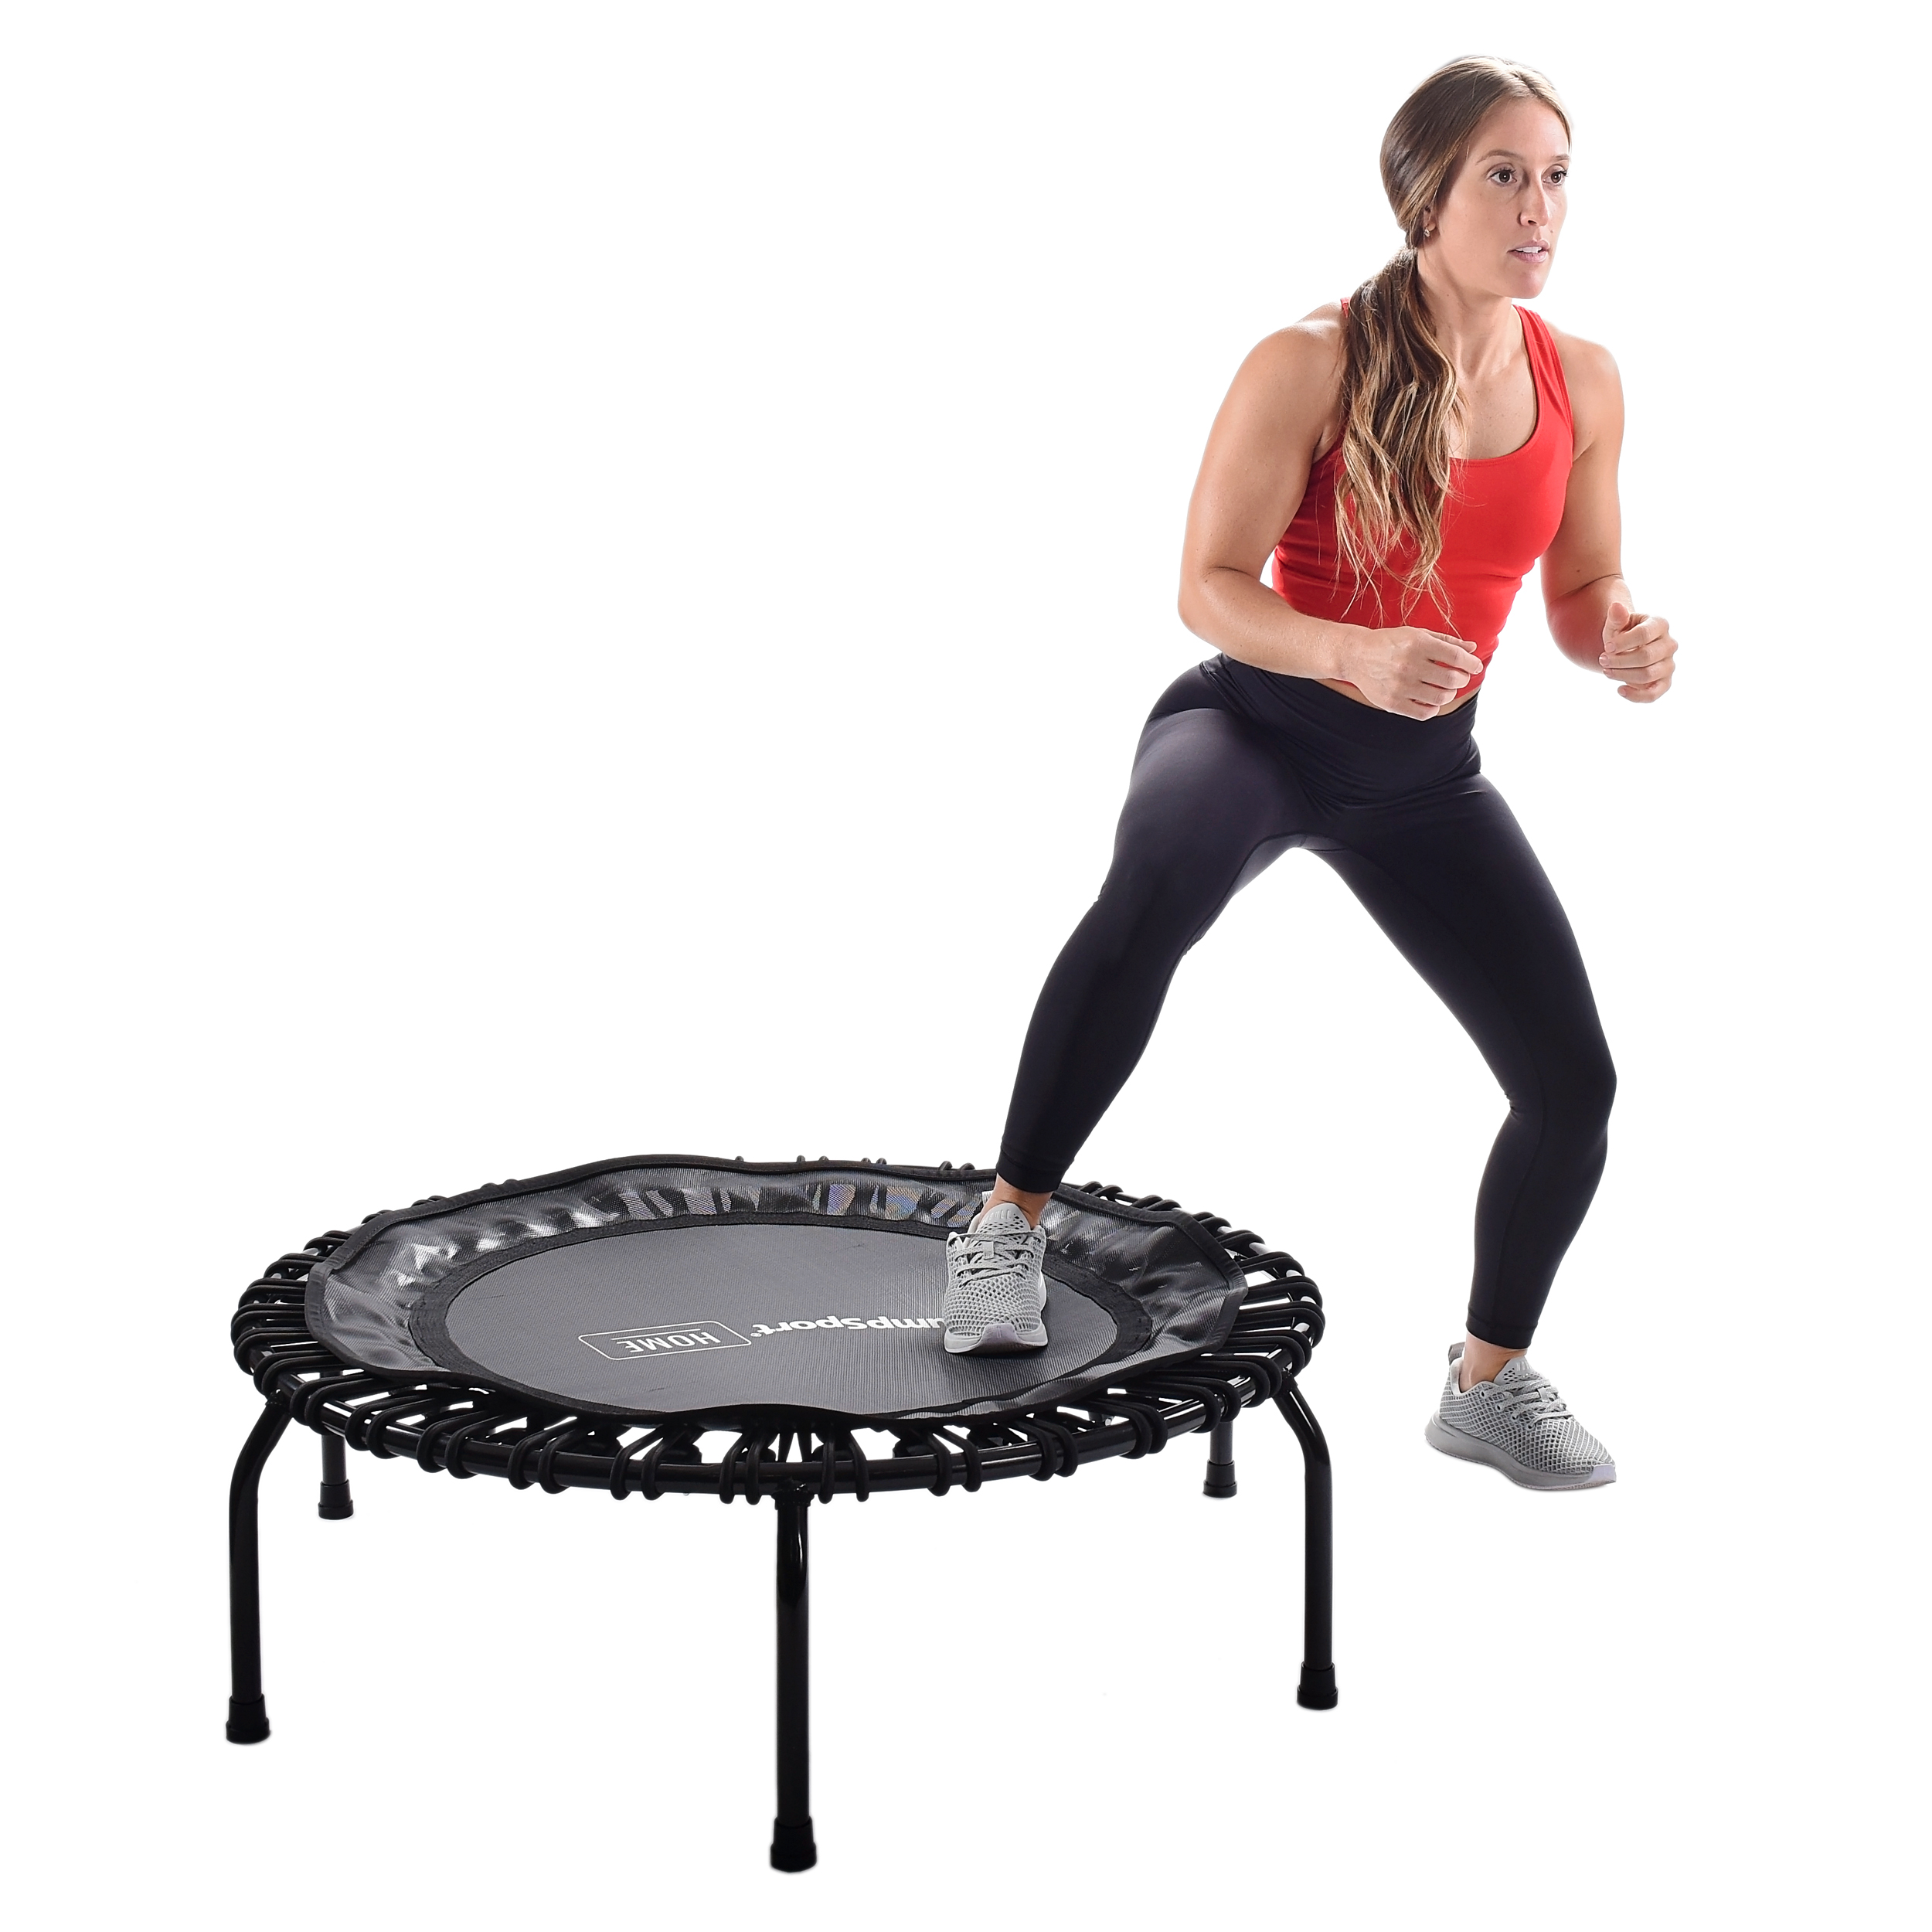 JumpSport Home 105 Fitness Trampoline - Stamina Products